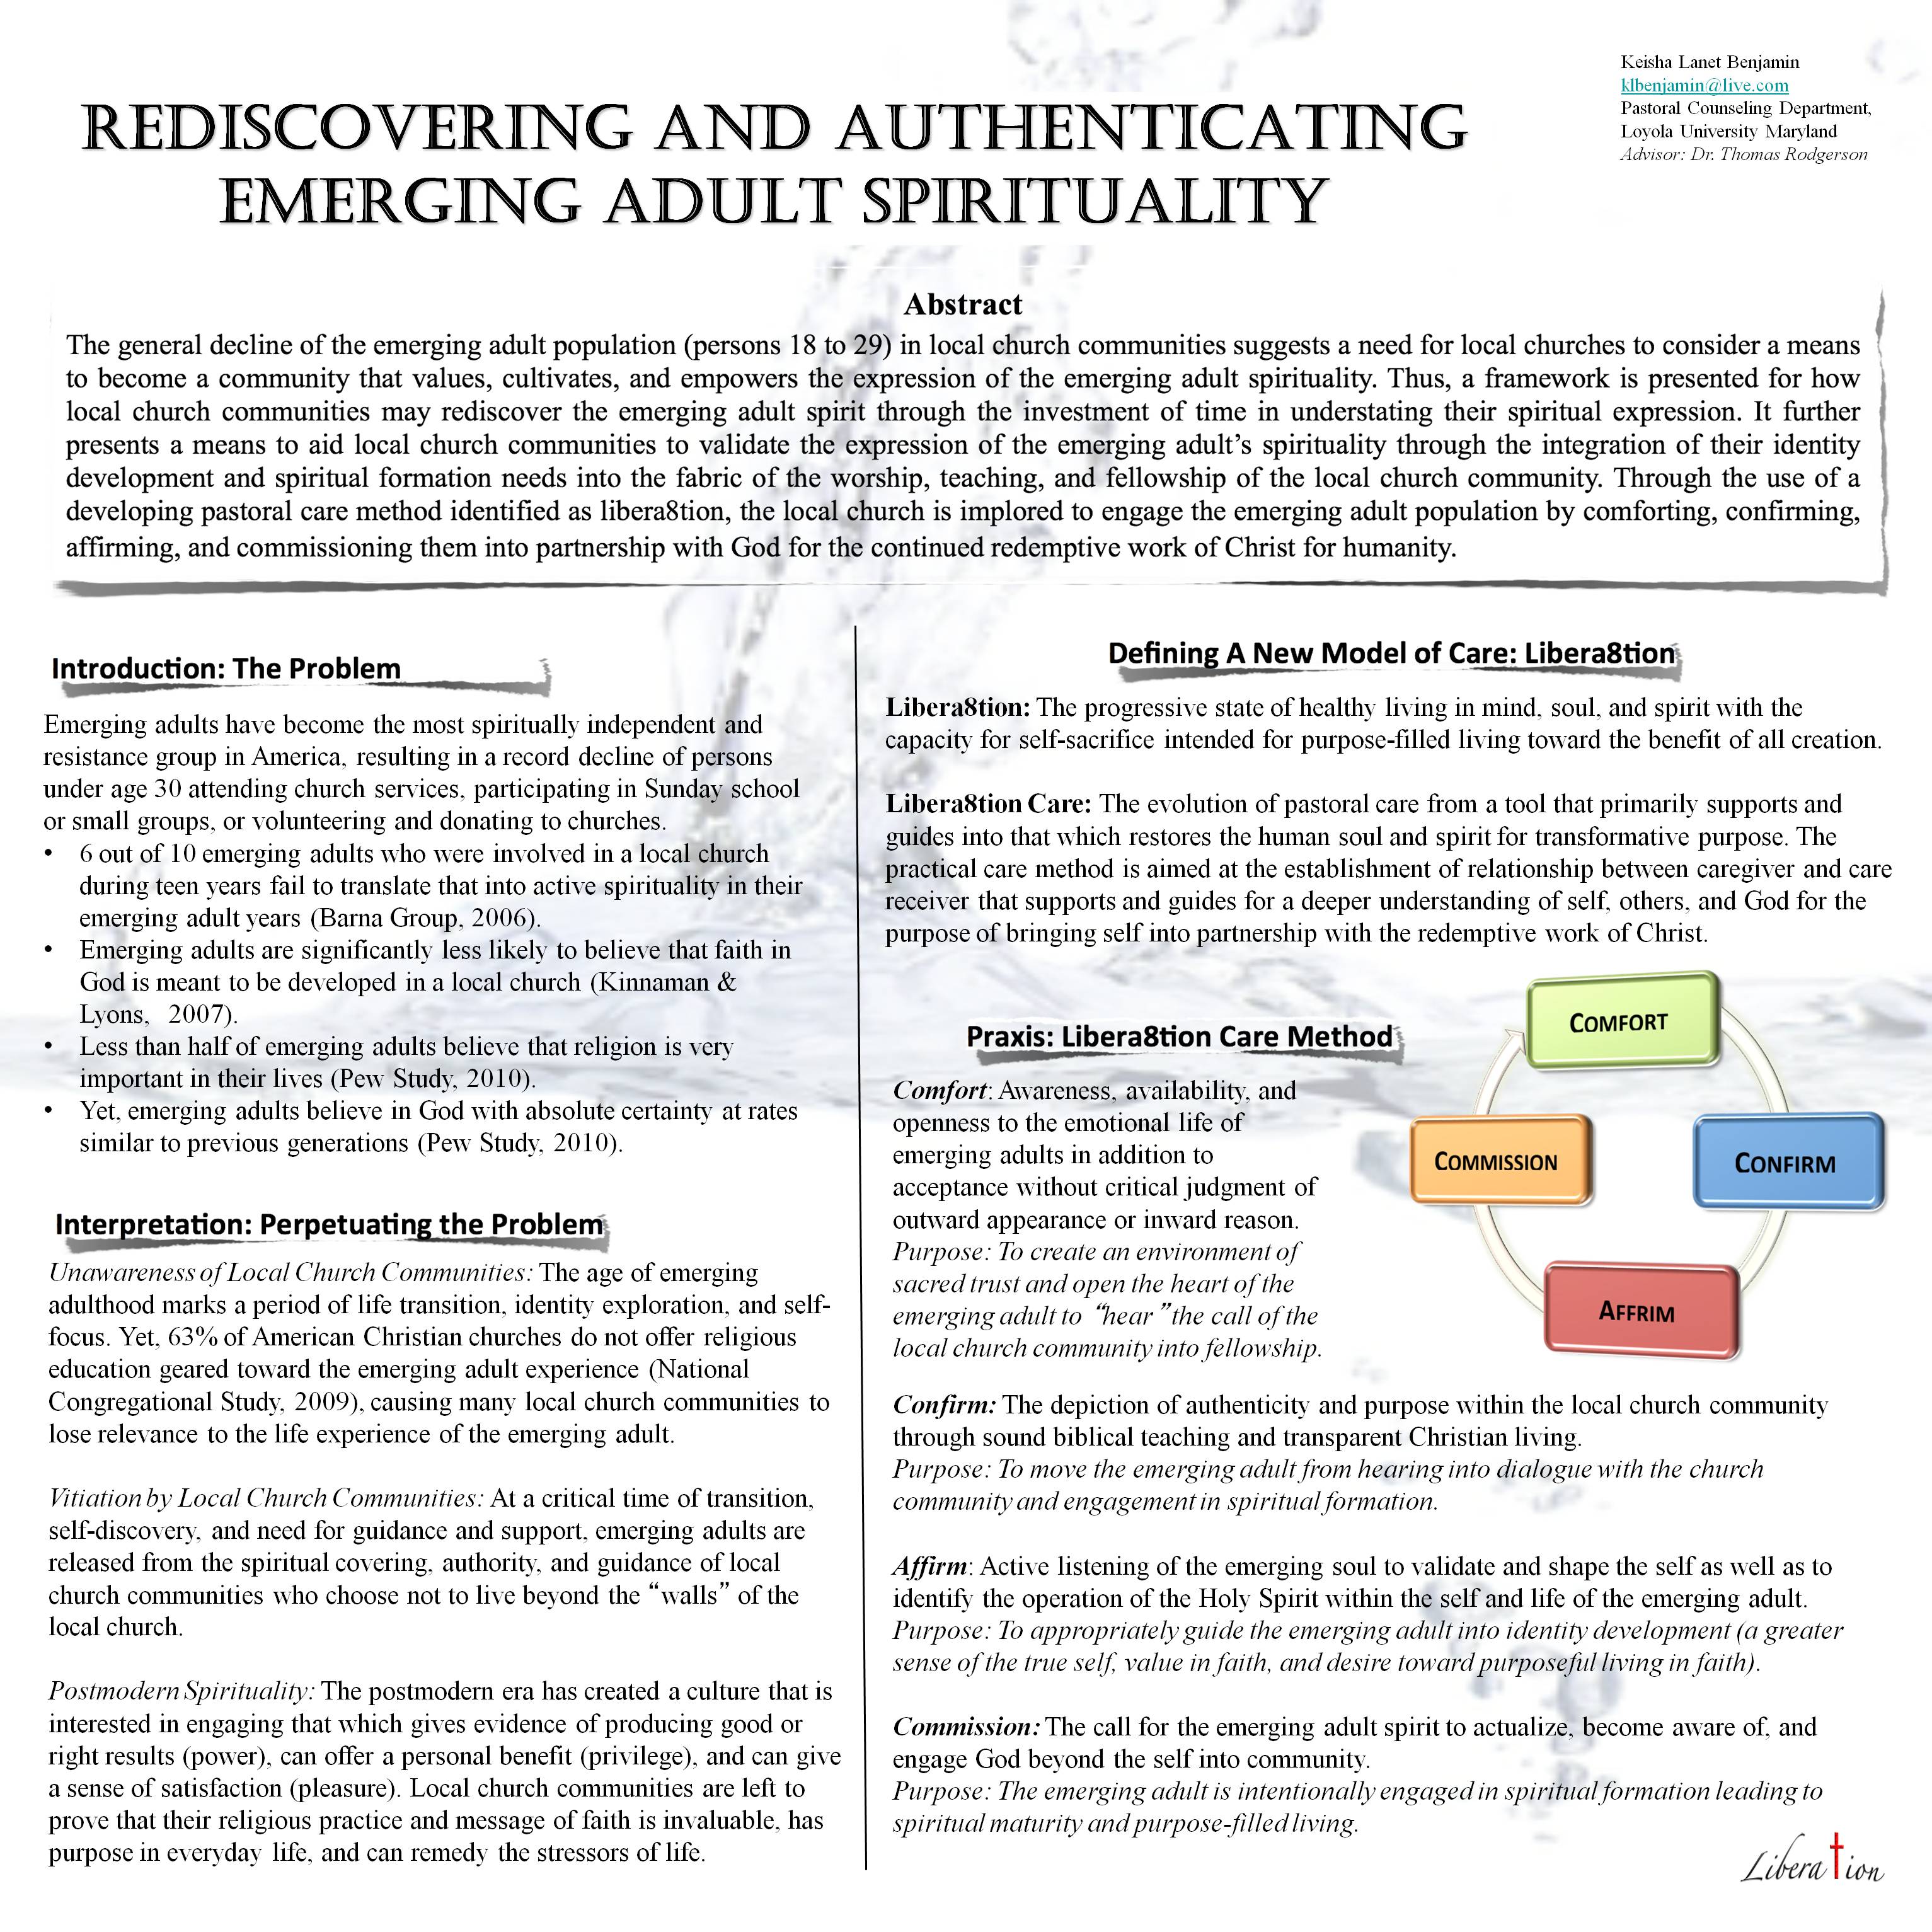 Poster image:   Rediscovering and Authenticating the Emerging Adult Spirit